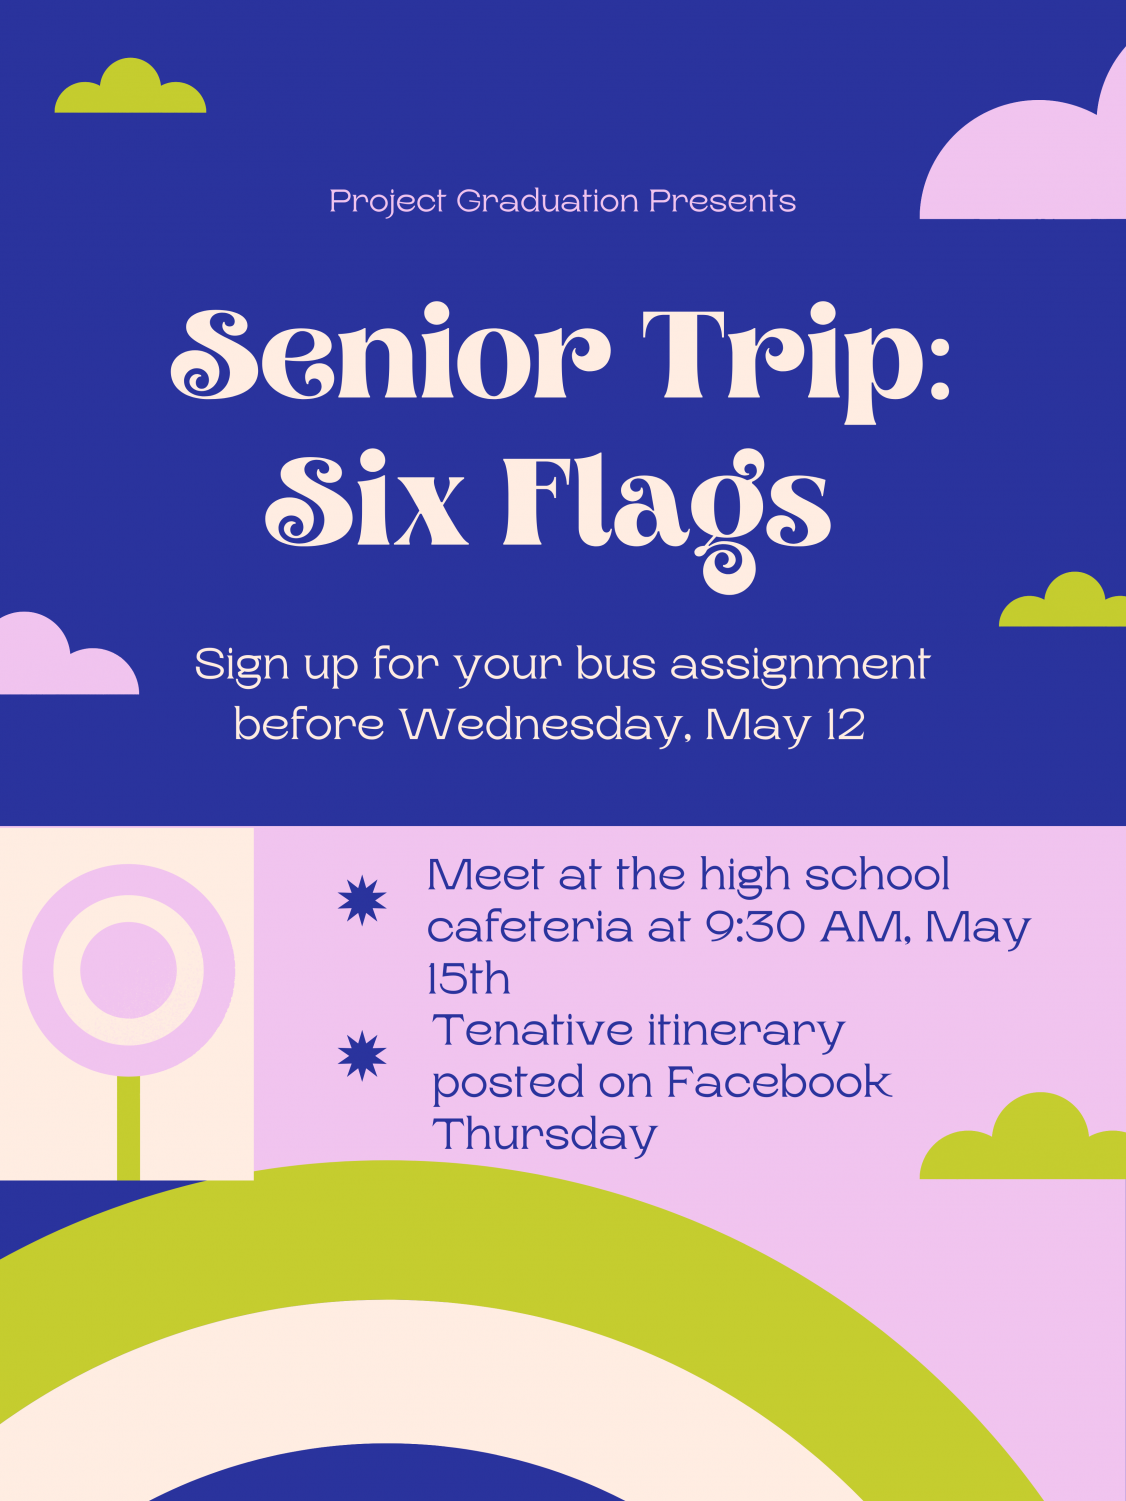 Seniors will travel to the Six Flags theme park on Saturday, May 15. Project graduation organized this event as well as the senior prize dinner later this month. 